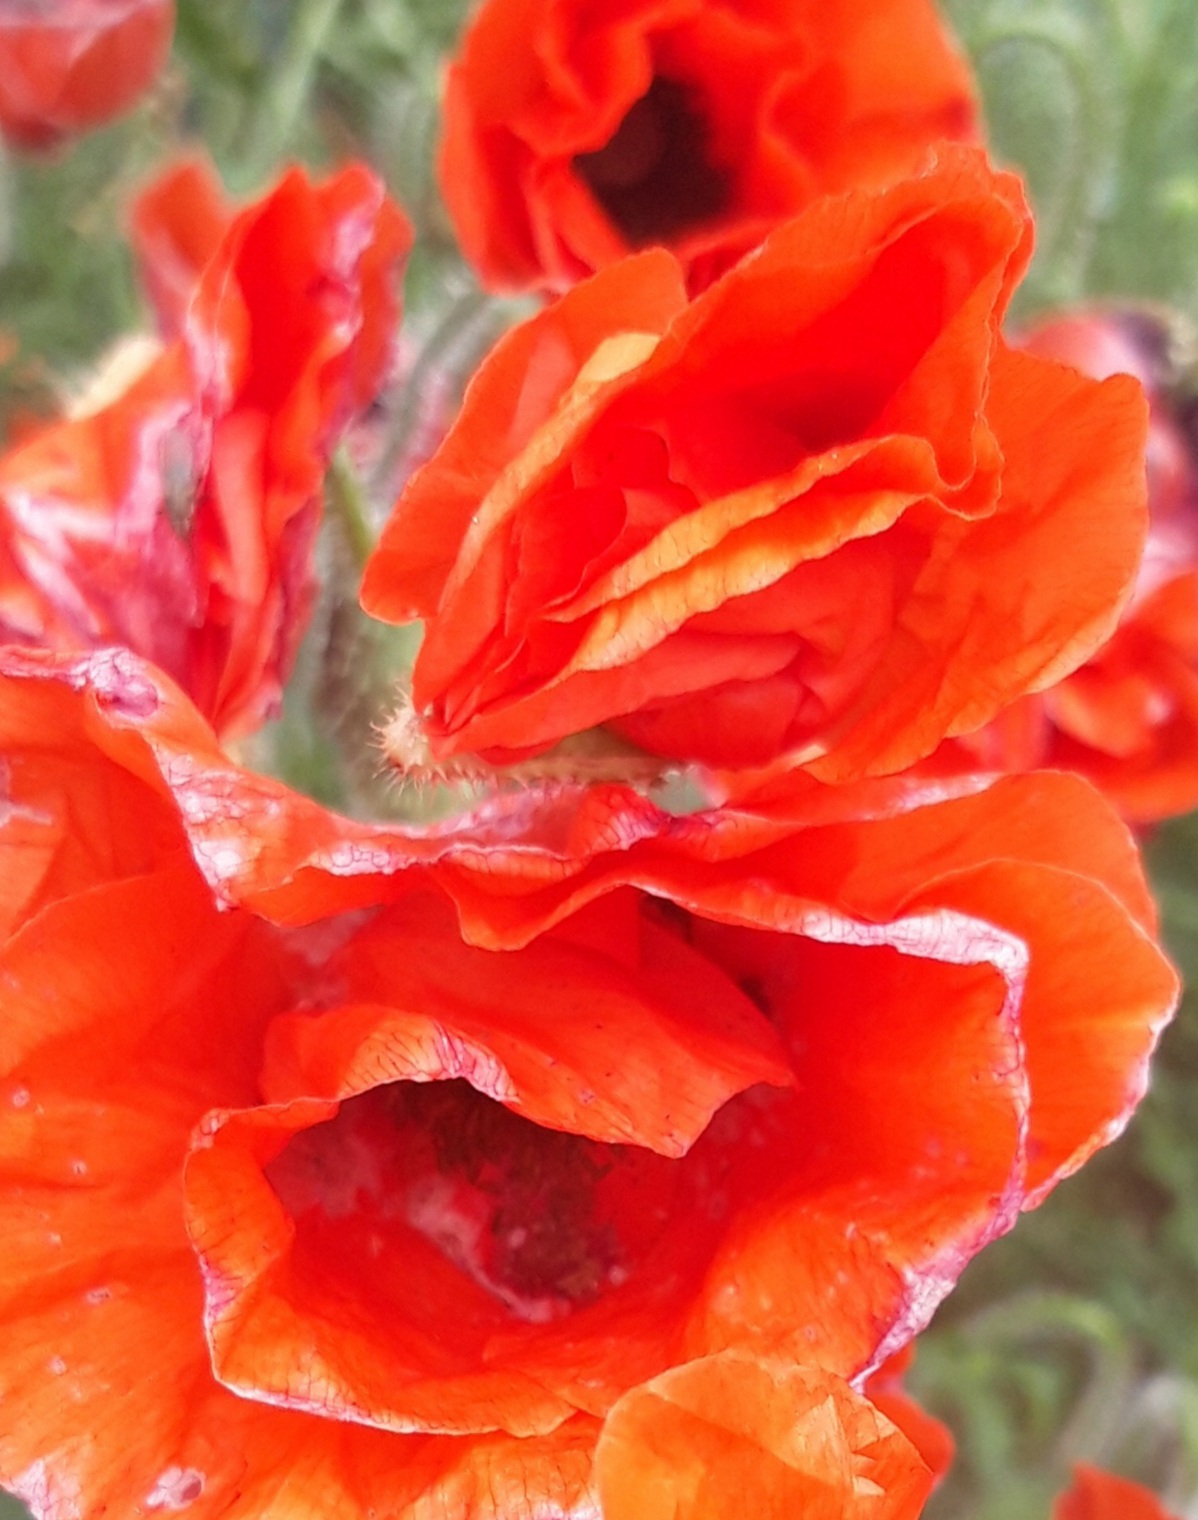 Swirling red  poppies